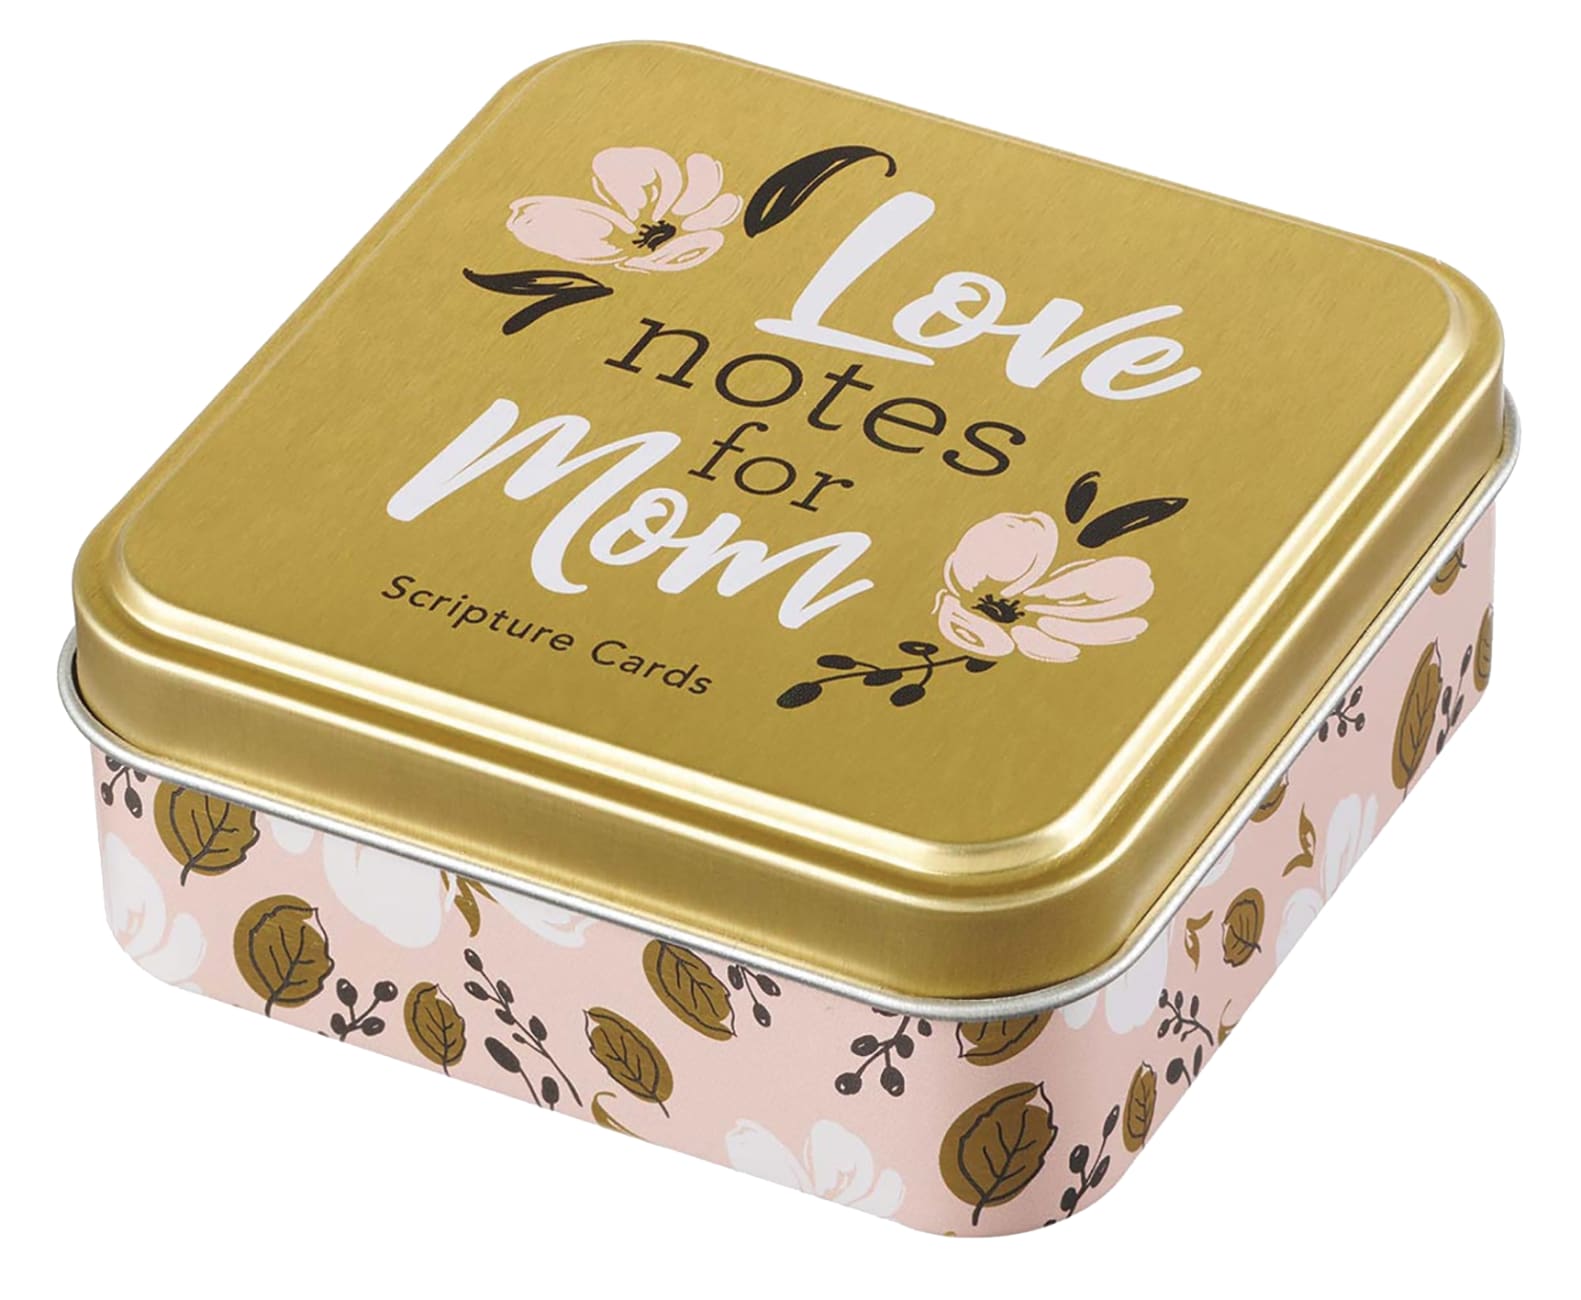 Scripture Cards in Tin: Love Notes For Mum, 50 Double-Sided Cards Box